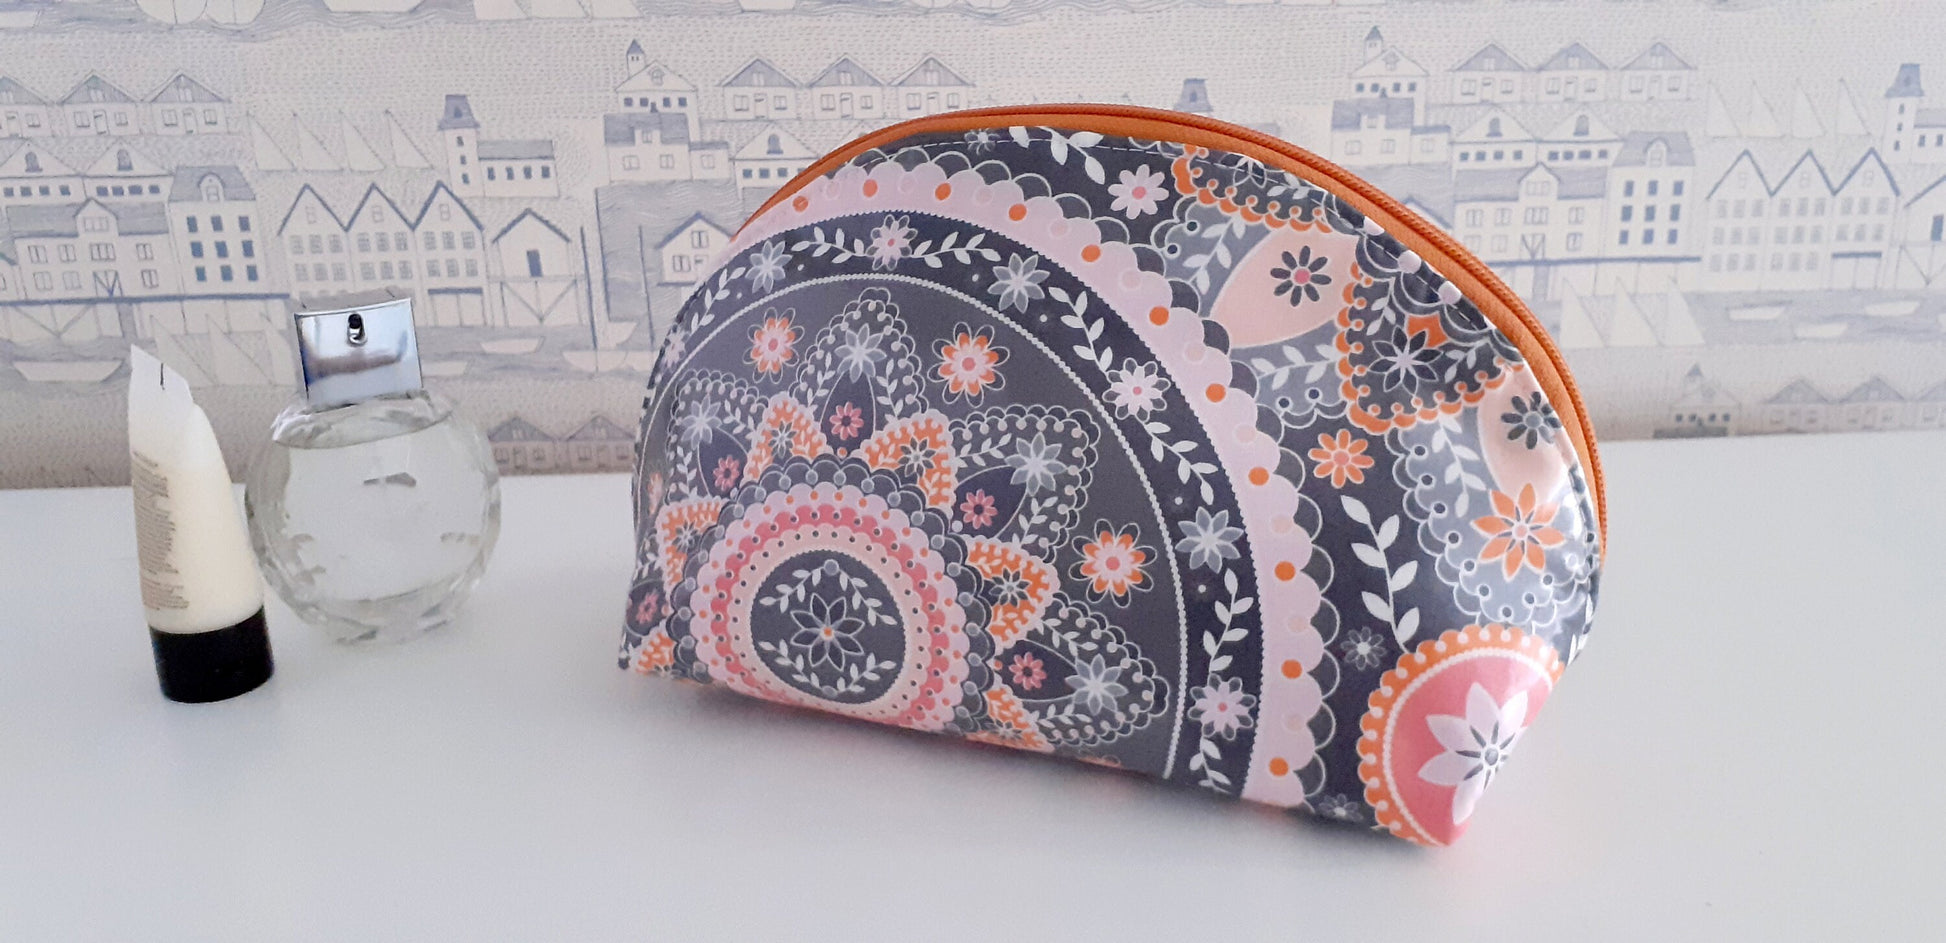 Wipe clean zip pouch, toiletry bag for her, travel storage case, large cosmetic bag, paisley pink orange make up bag